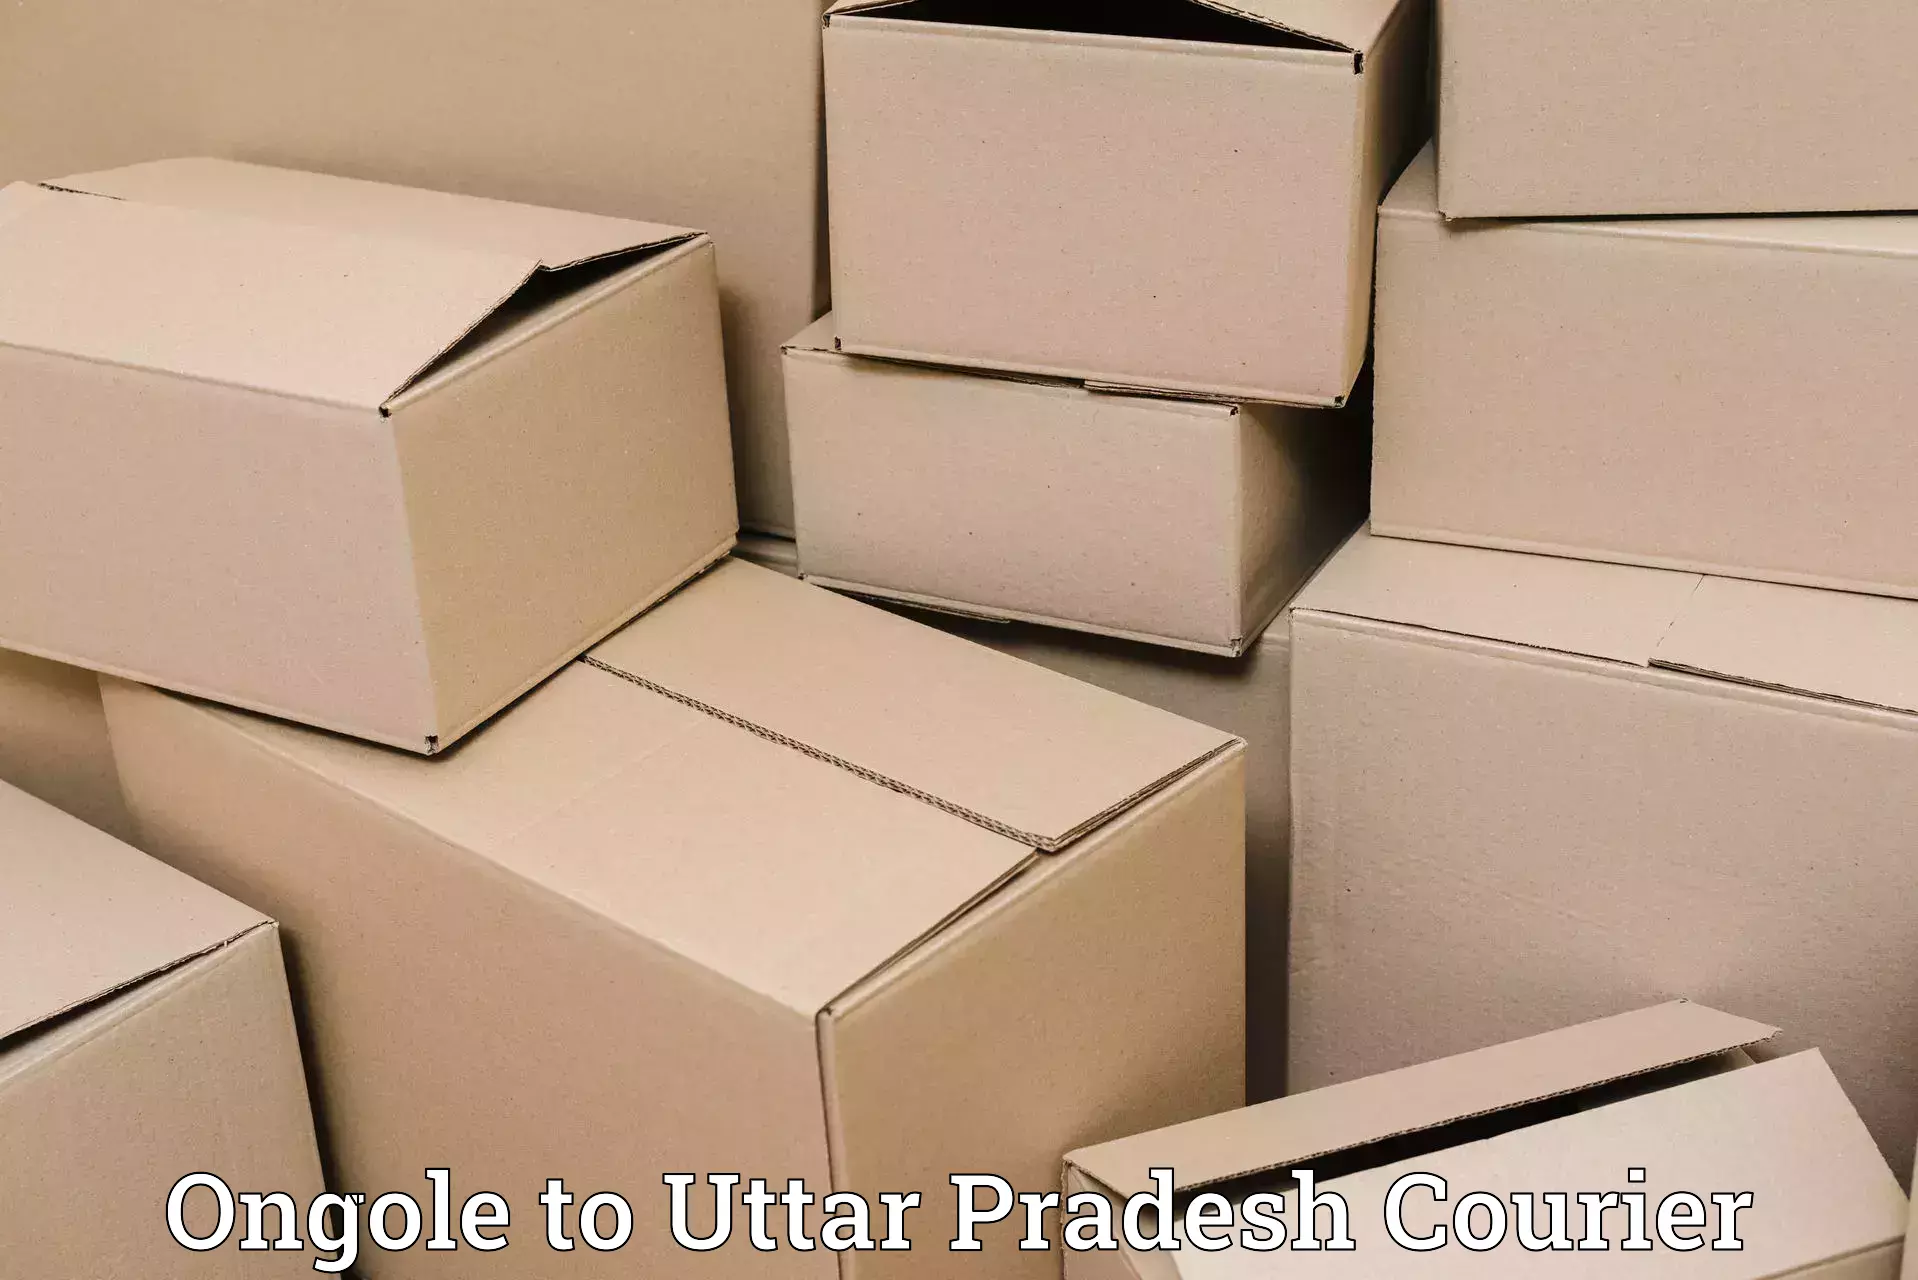 Reliable logistics providers Ongole to Behat